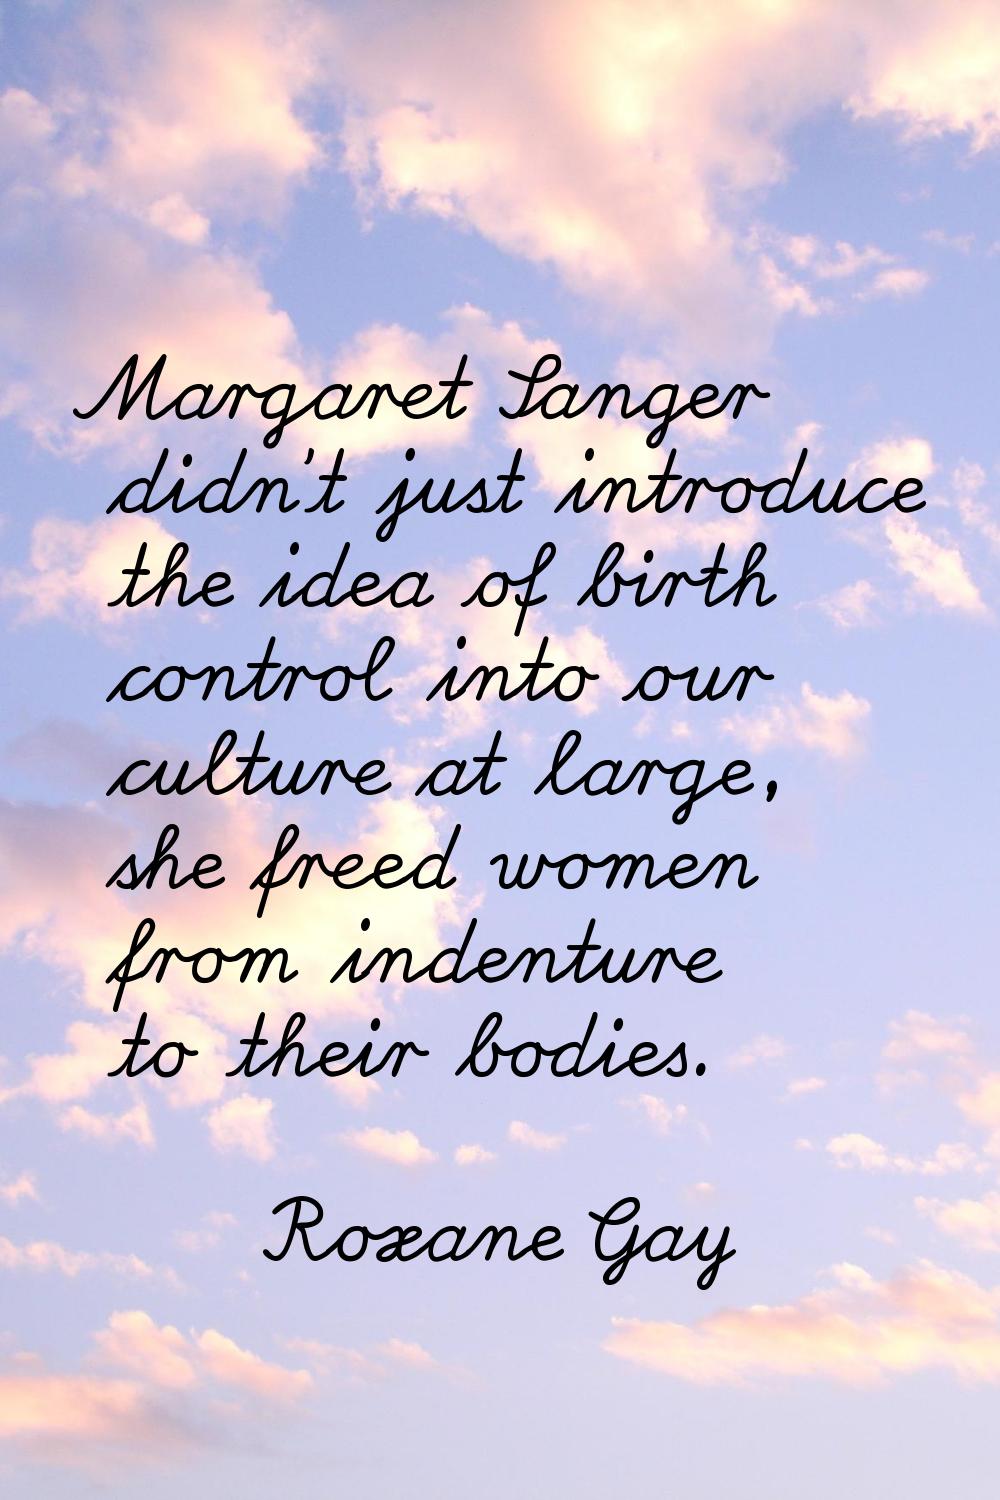 Margaret Sanger didn't just introduce the idea of birth control into our culture at large, she free